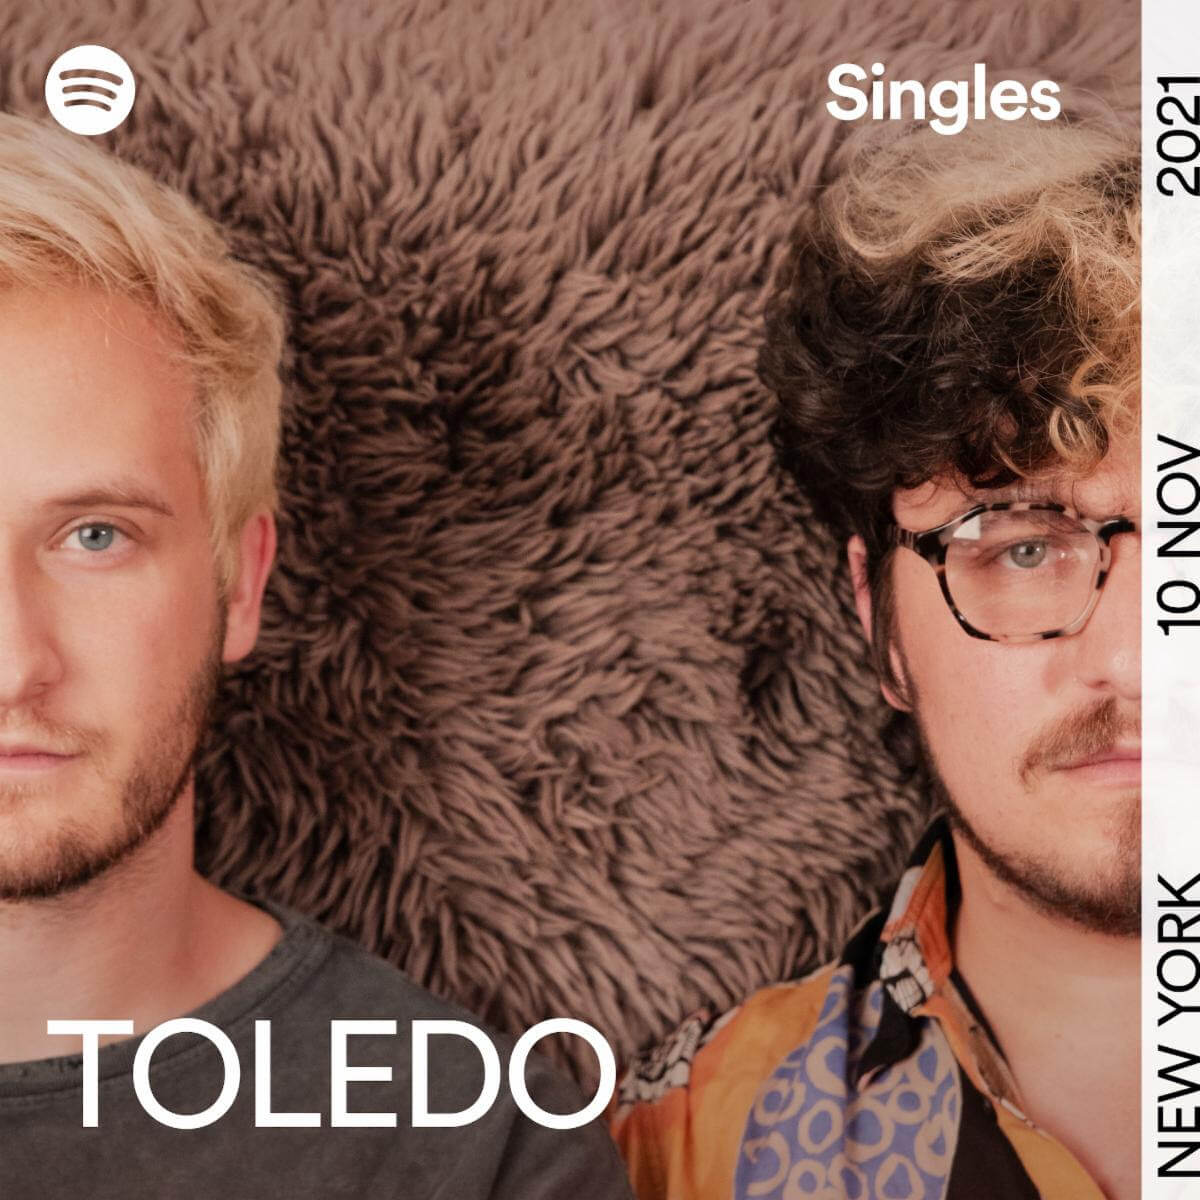 Toledo Debut New Single "Beach Coma." The Gabe Wax-produced track is part of the Fresh Finds x Spotify Singles, available today to stream